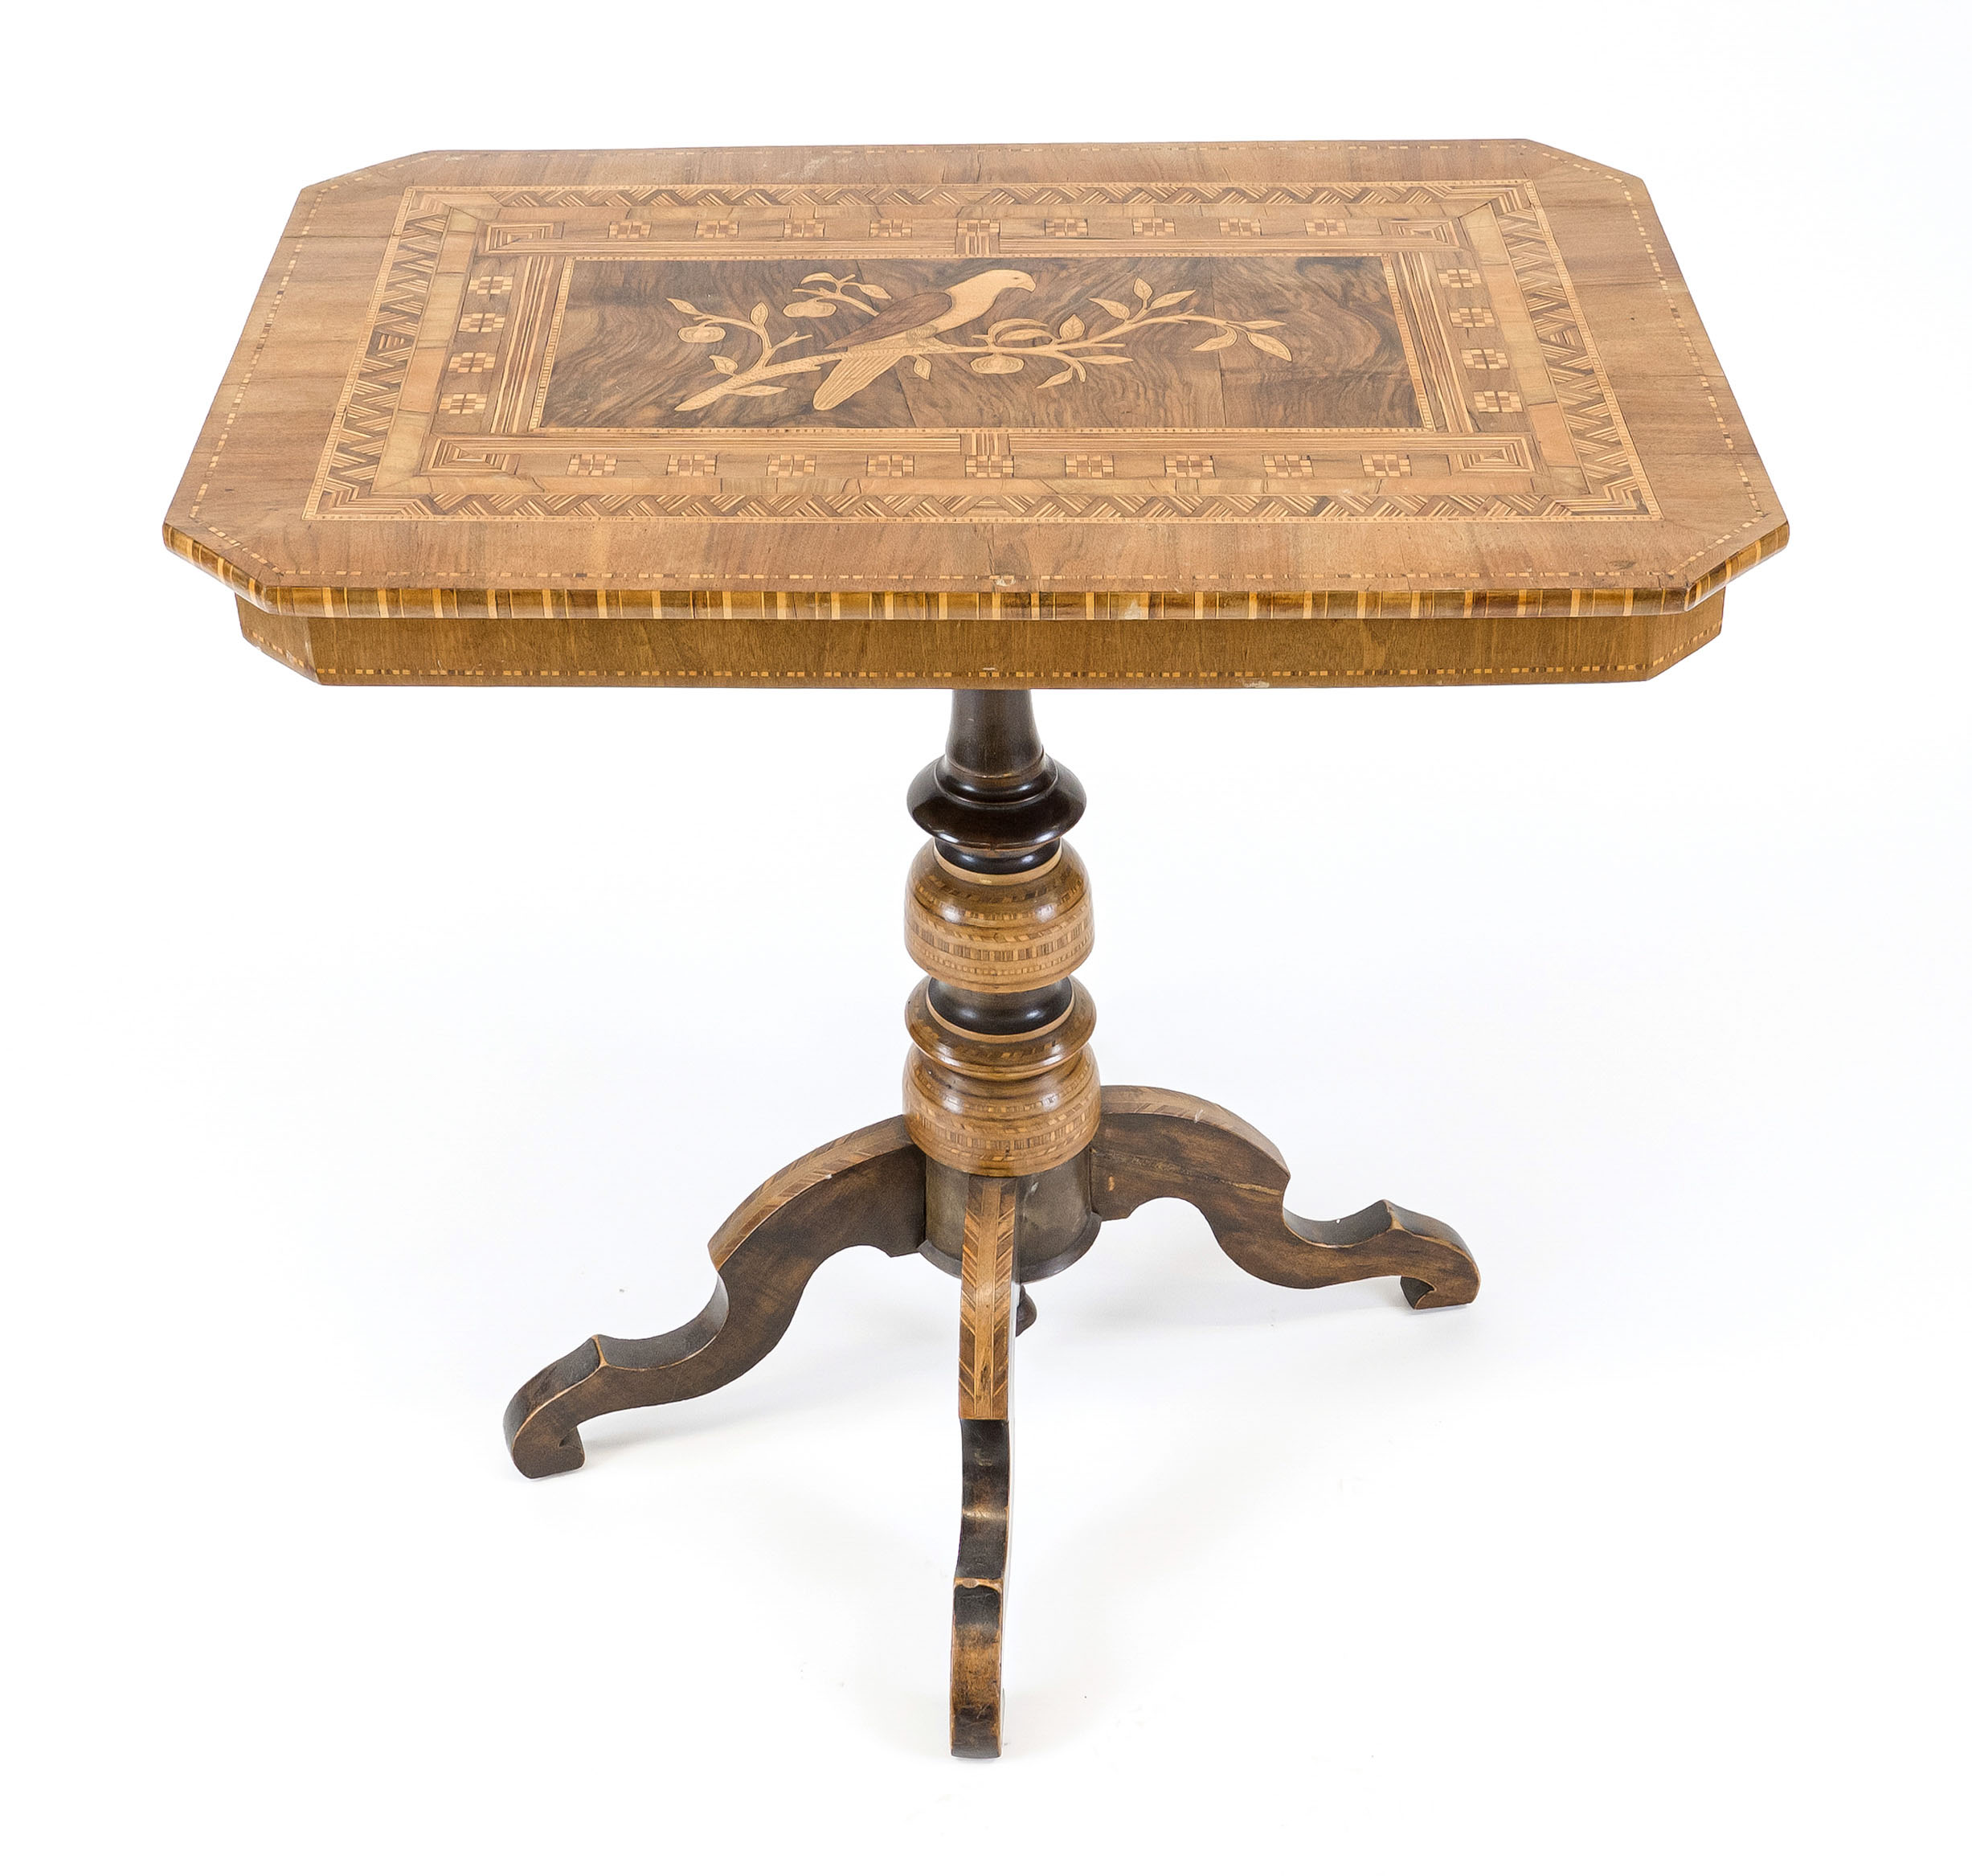 Viennese Biedermeier table, c. 1830, walnut and other precious woods veneered and inlaid, 77 x 80